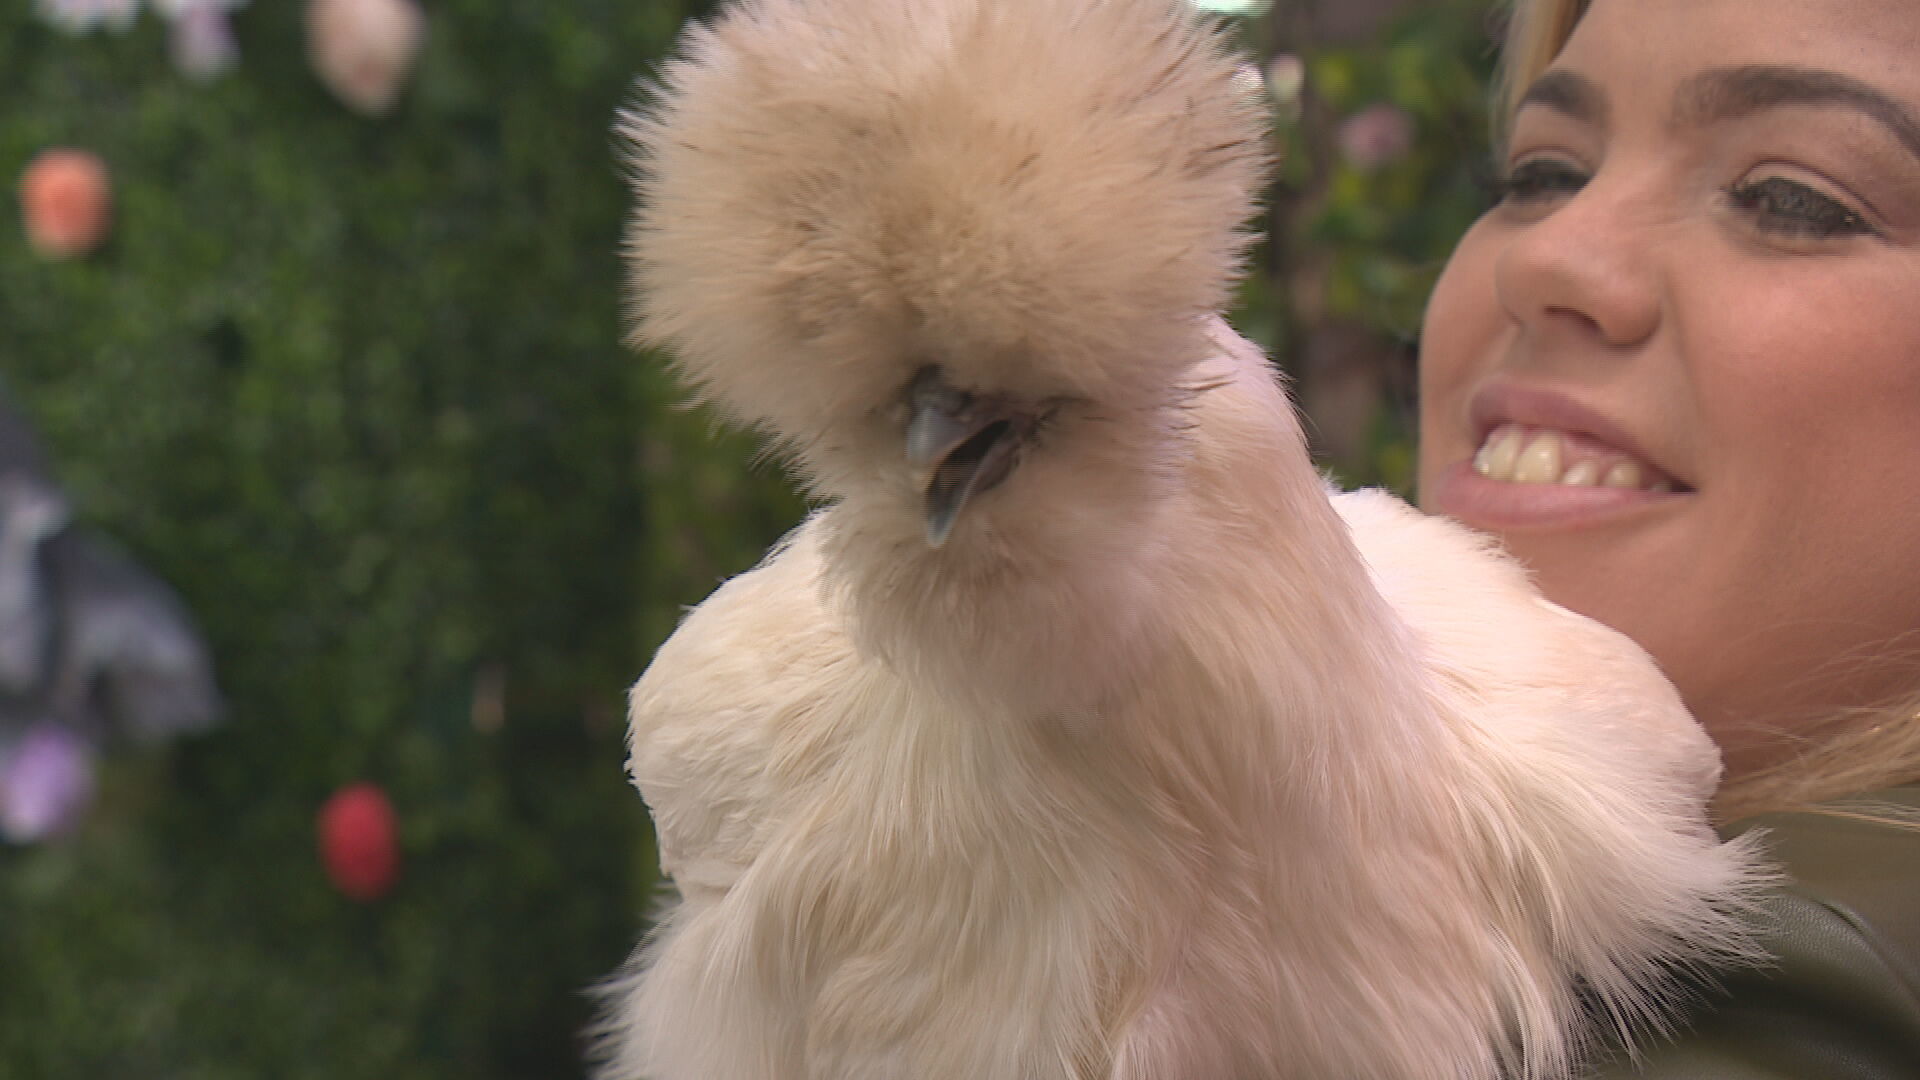 Danielle Jordan, director of Reptizoo Encounters, with rescued Silkie chicken, Lady Muck.